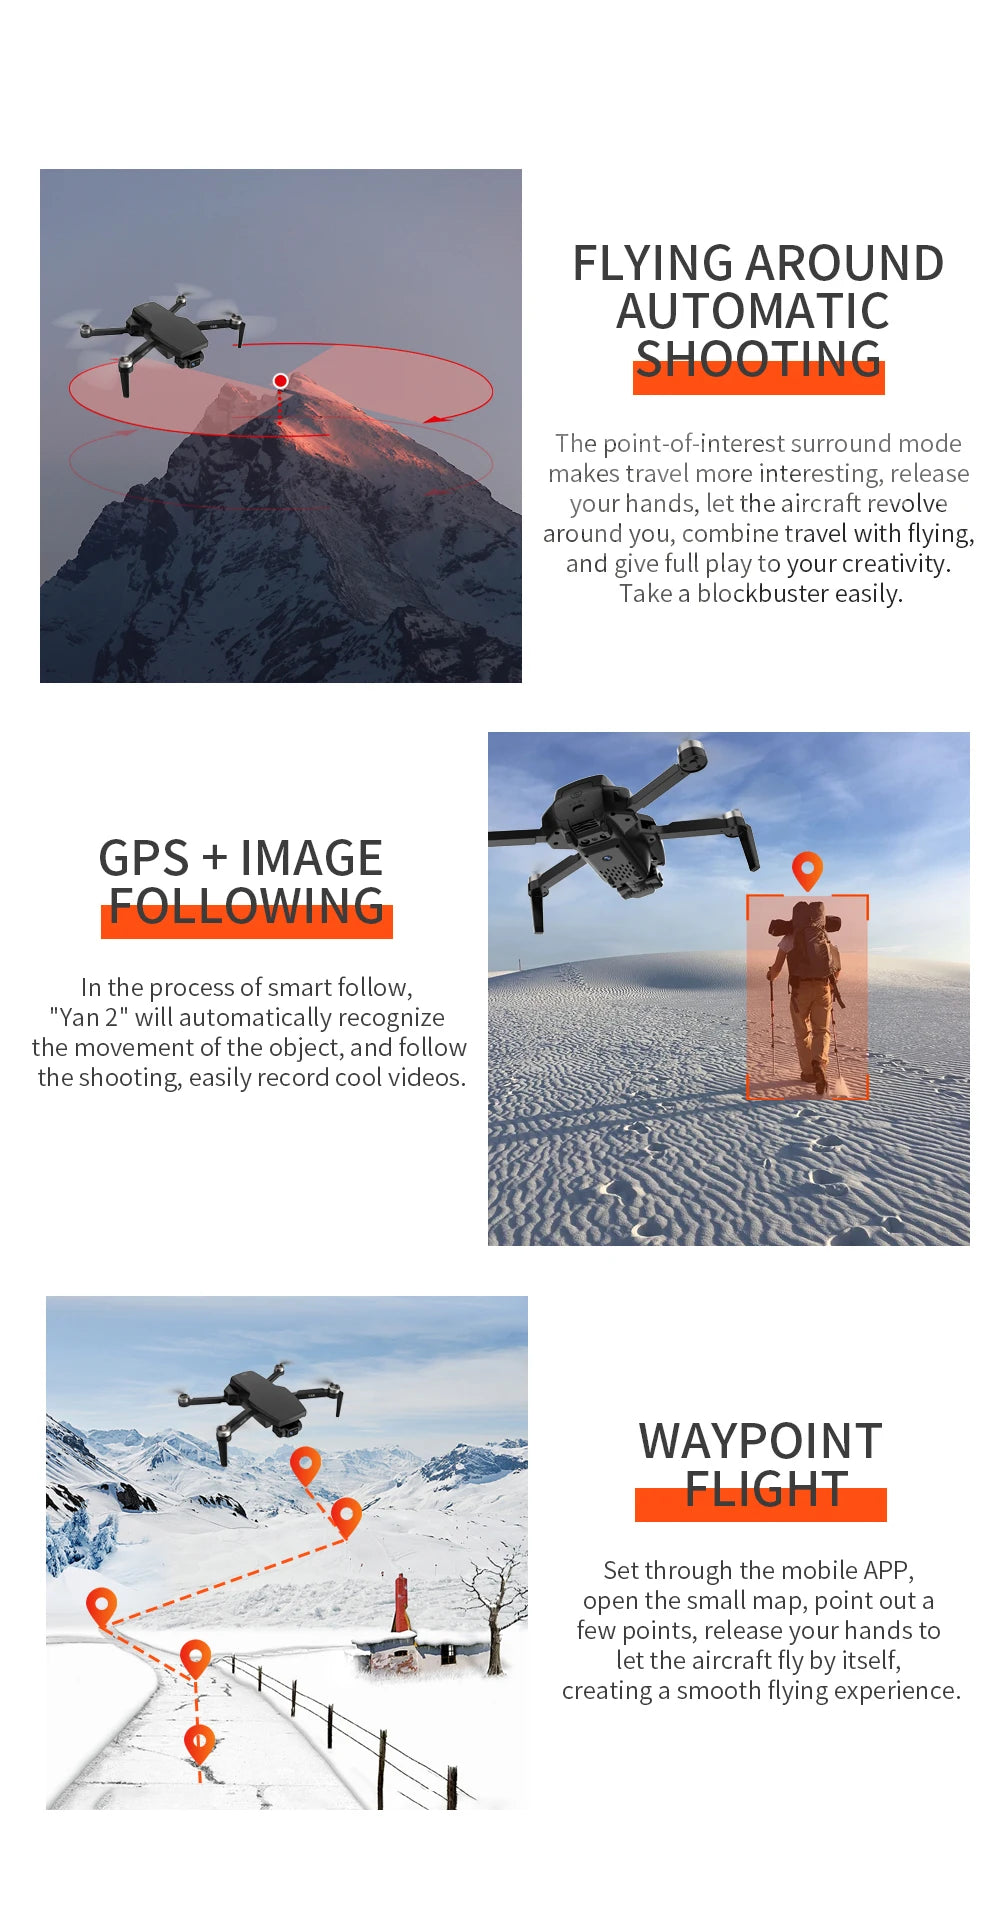 G108 Pro MAx Drone, "yan 2" is a point-of-interest app that allows you to follow